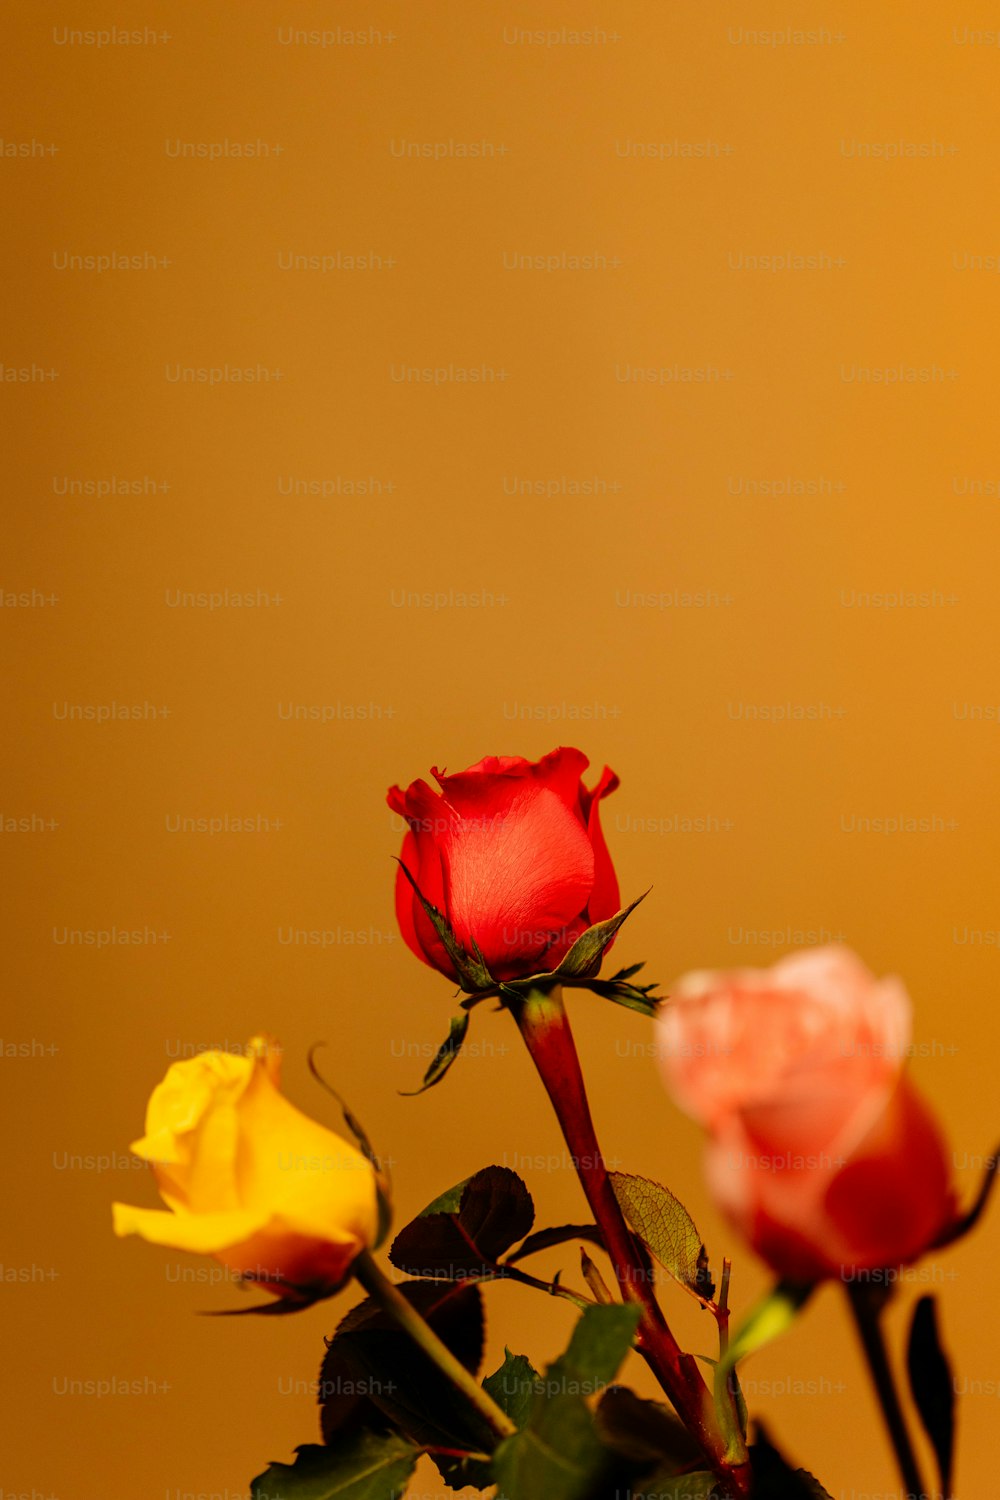 three roses in a vase on a table